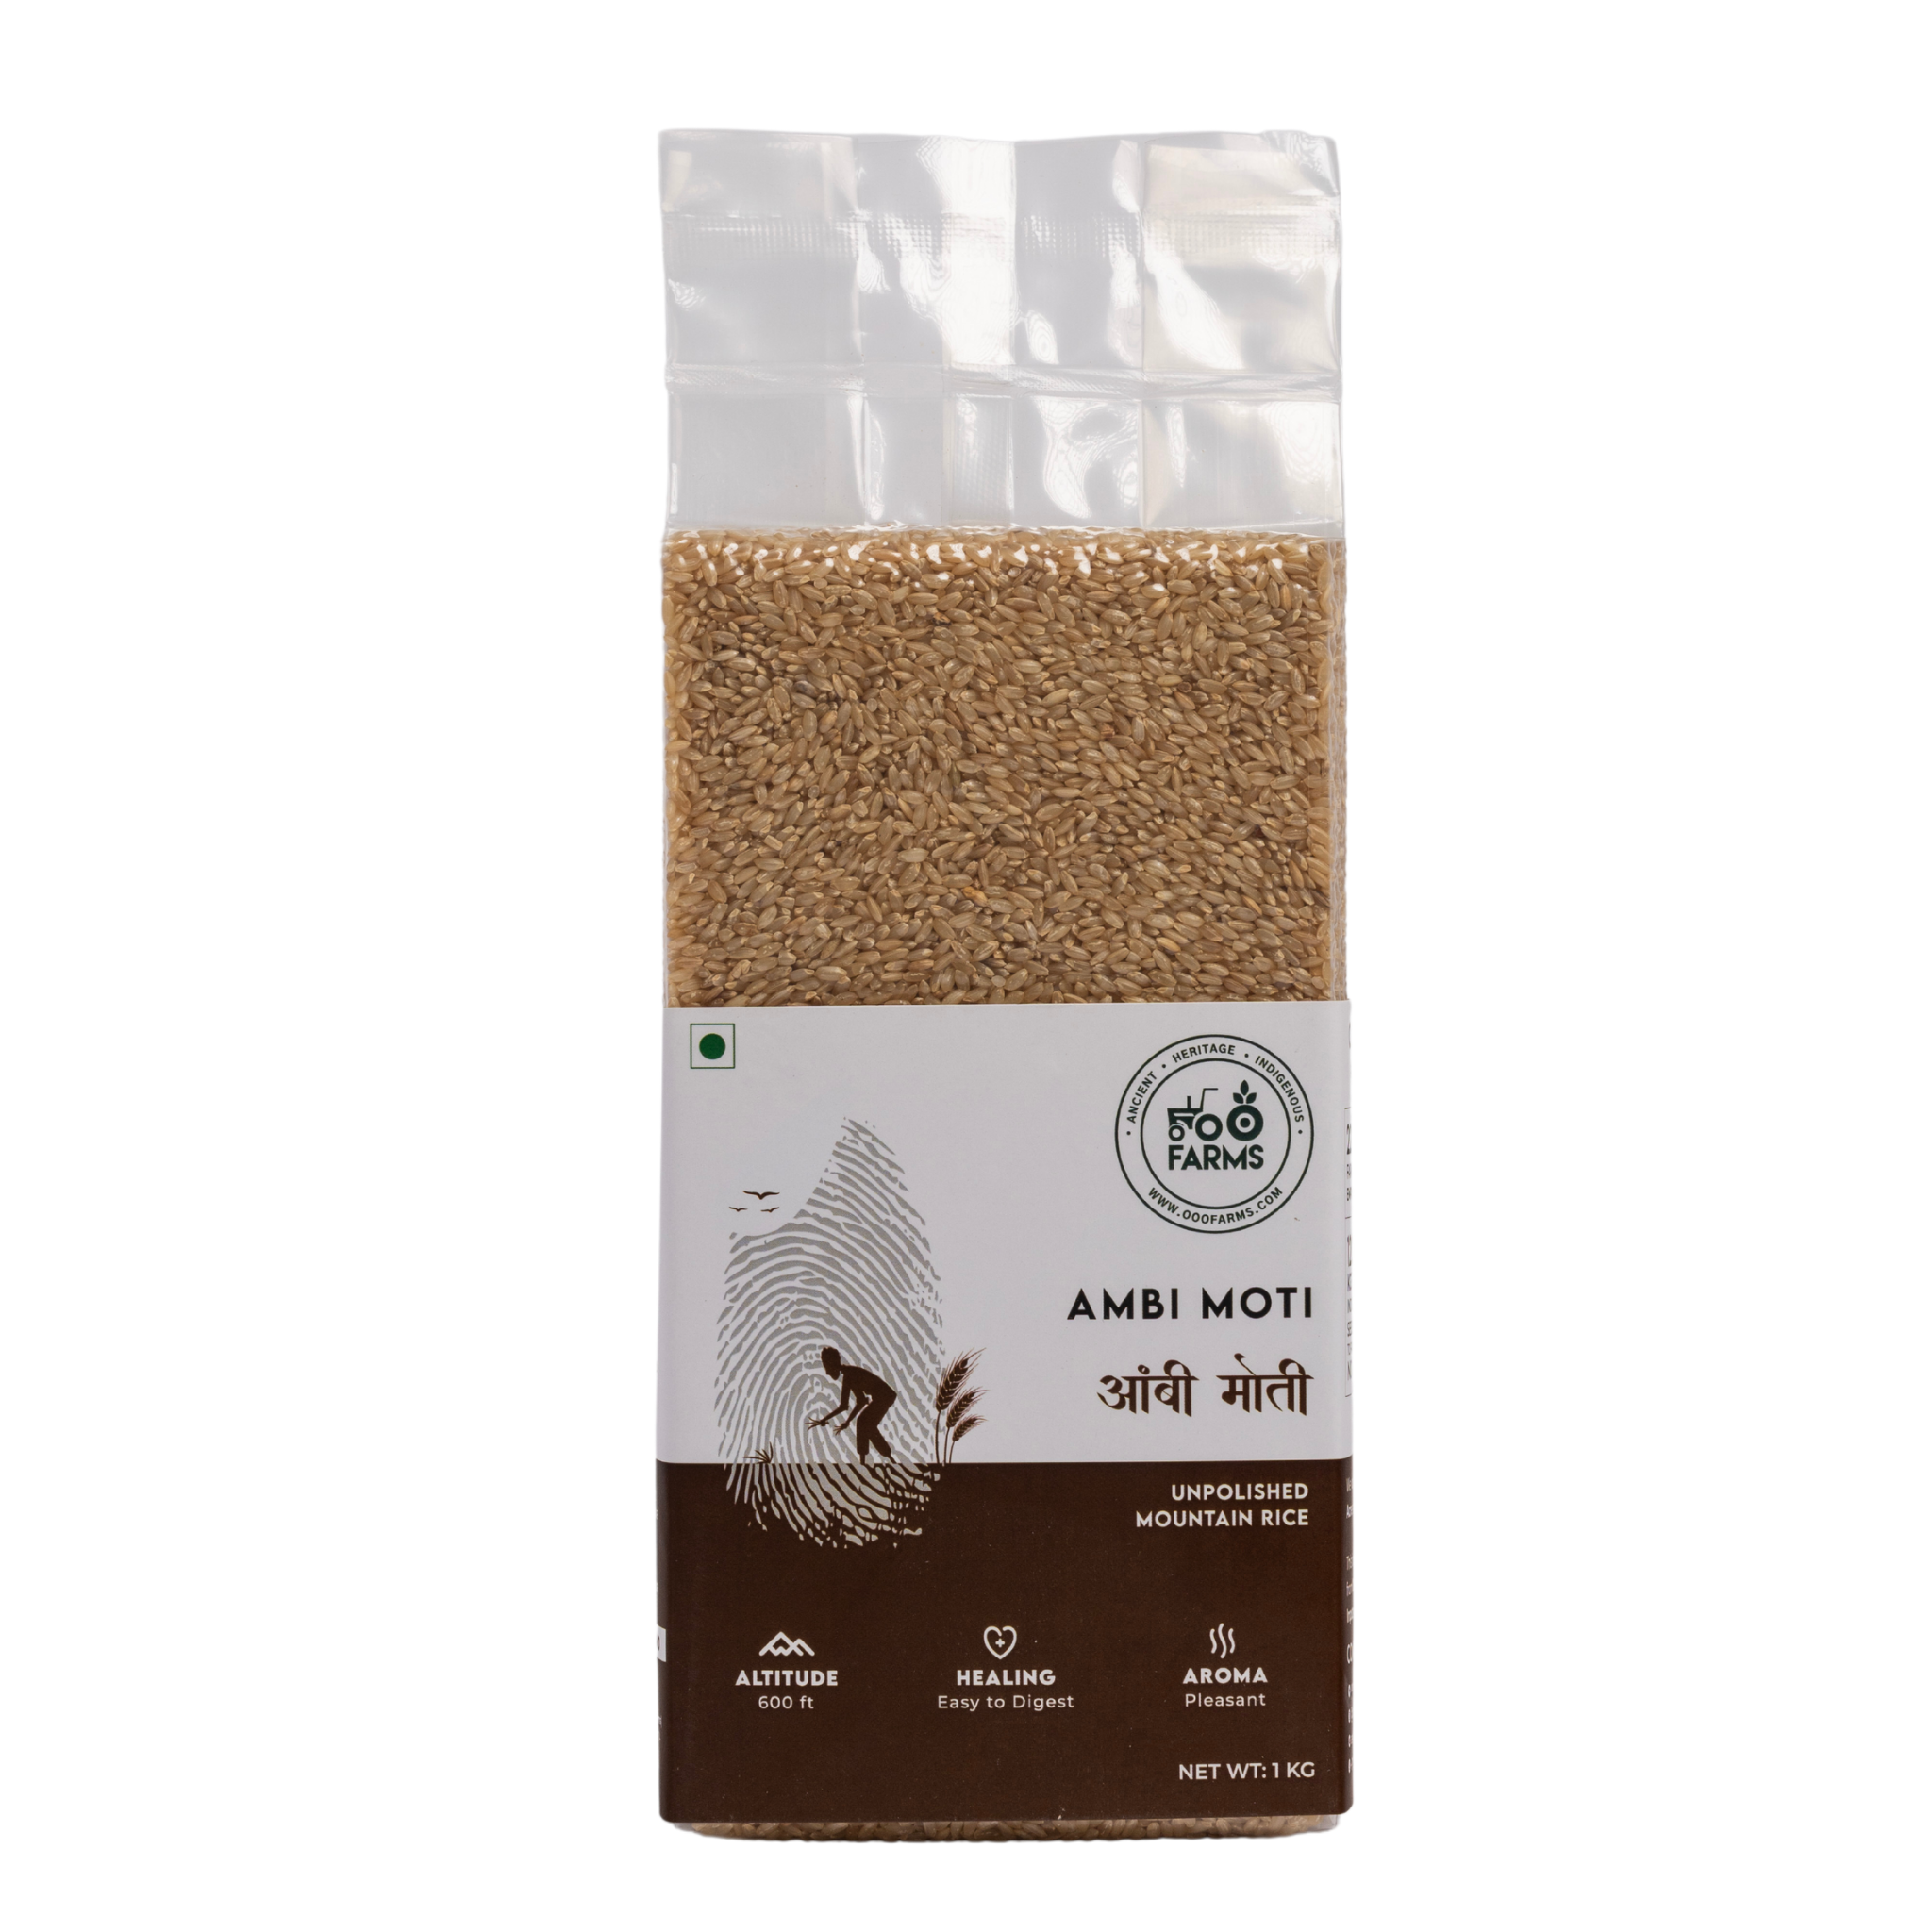 OOO Farms Ambi Moti Rice (Unpolished) Package Frontside